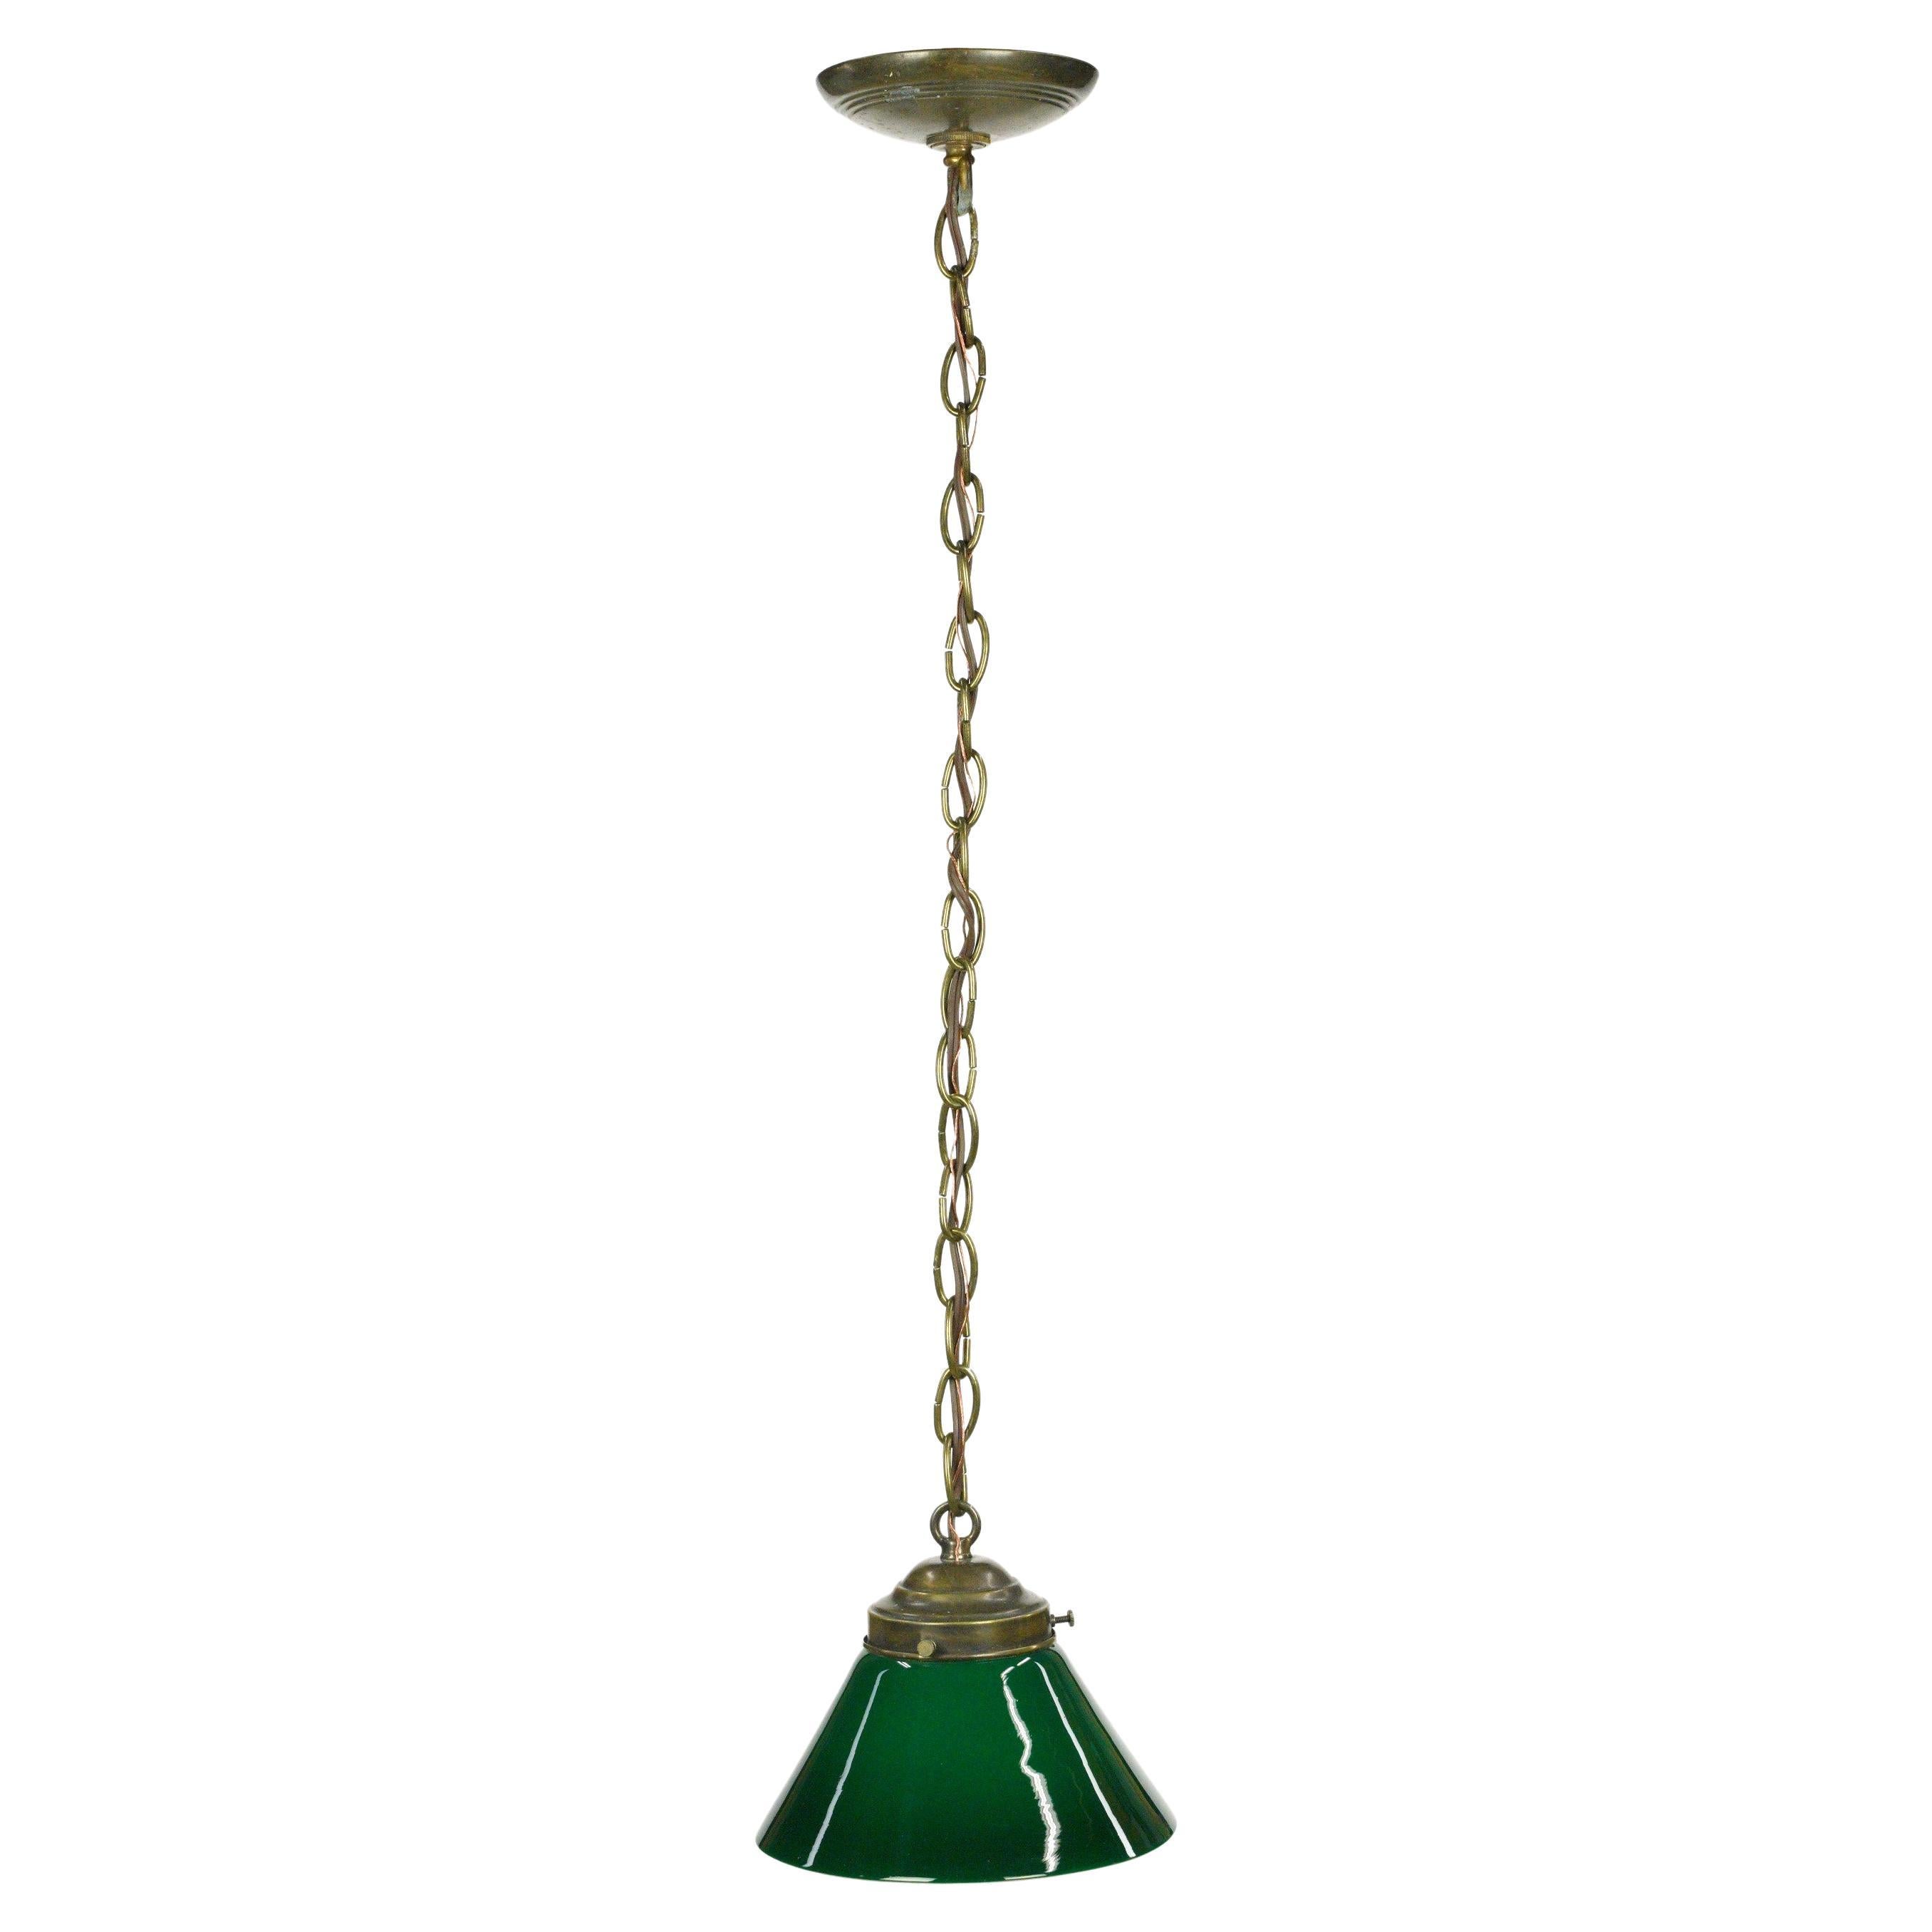 Rewired Green Glass Shade Brass Chain Pendant Light For Sale